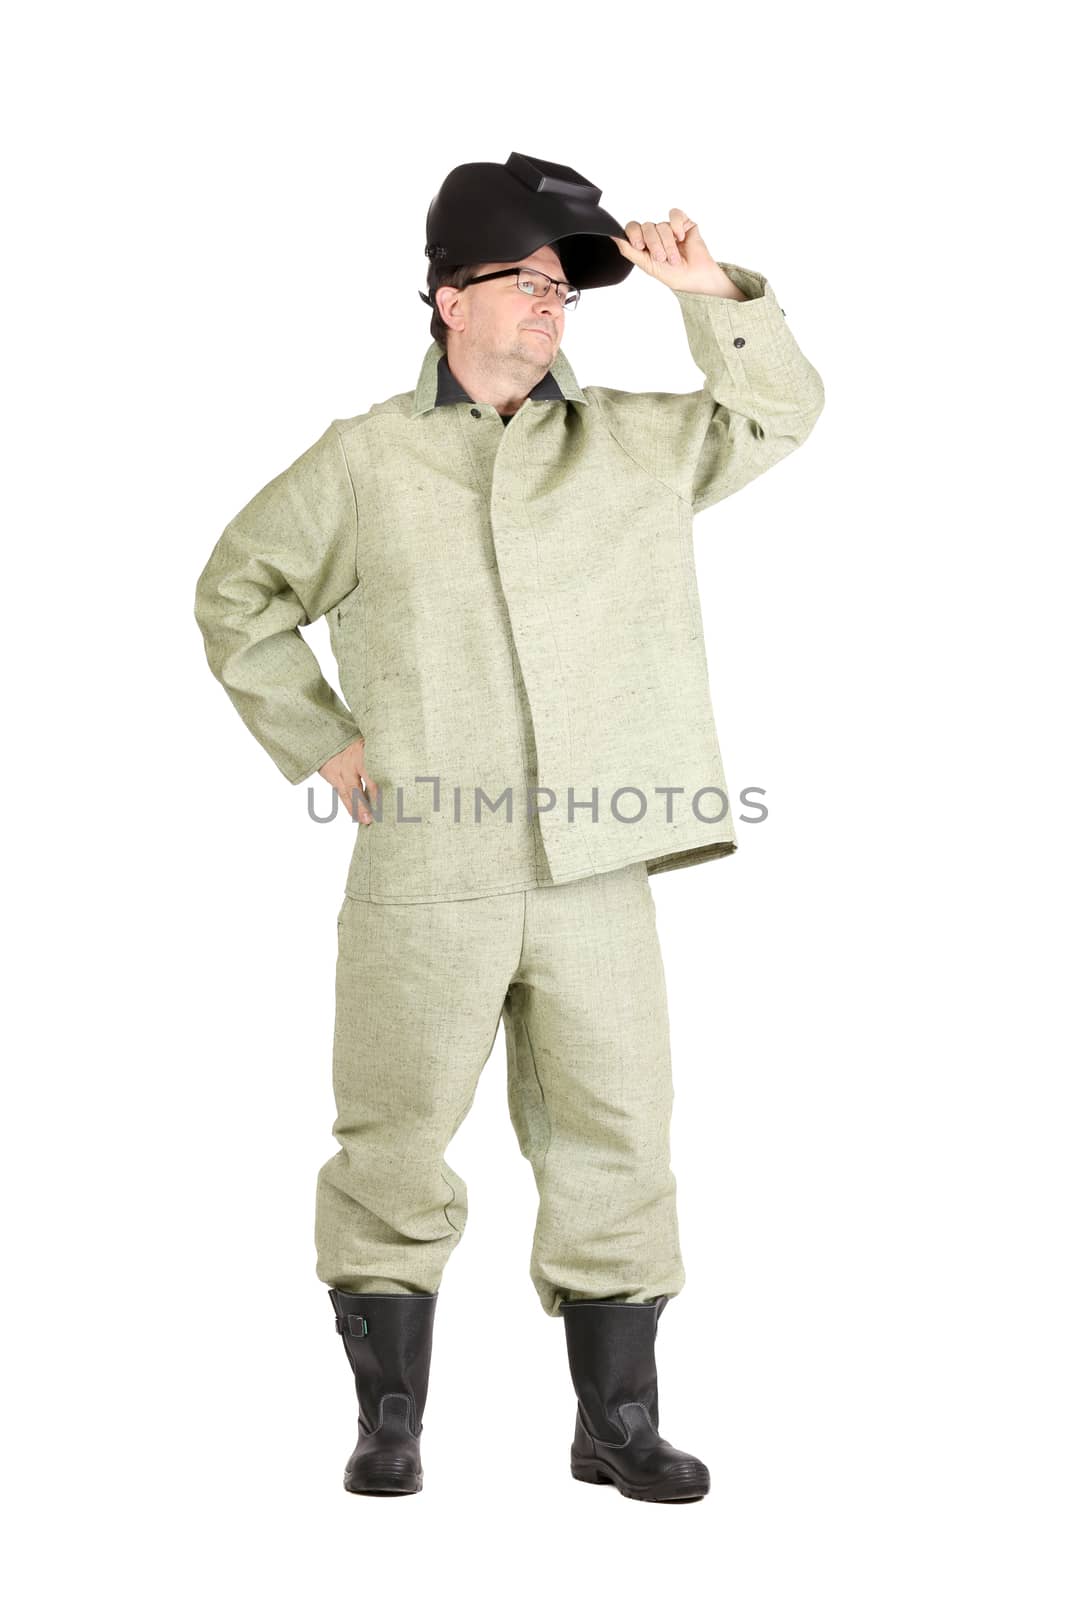 Confident welder holding mask. Isolated on a white background.